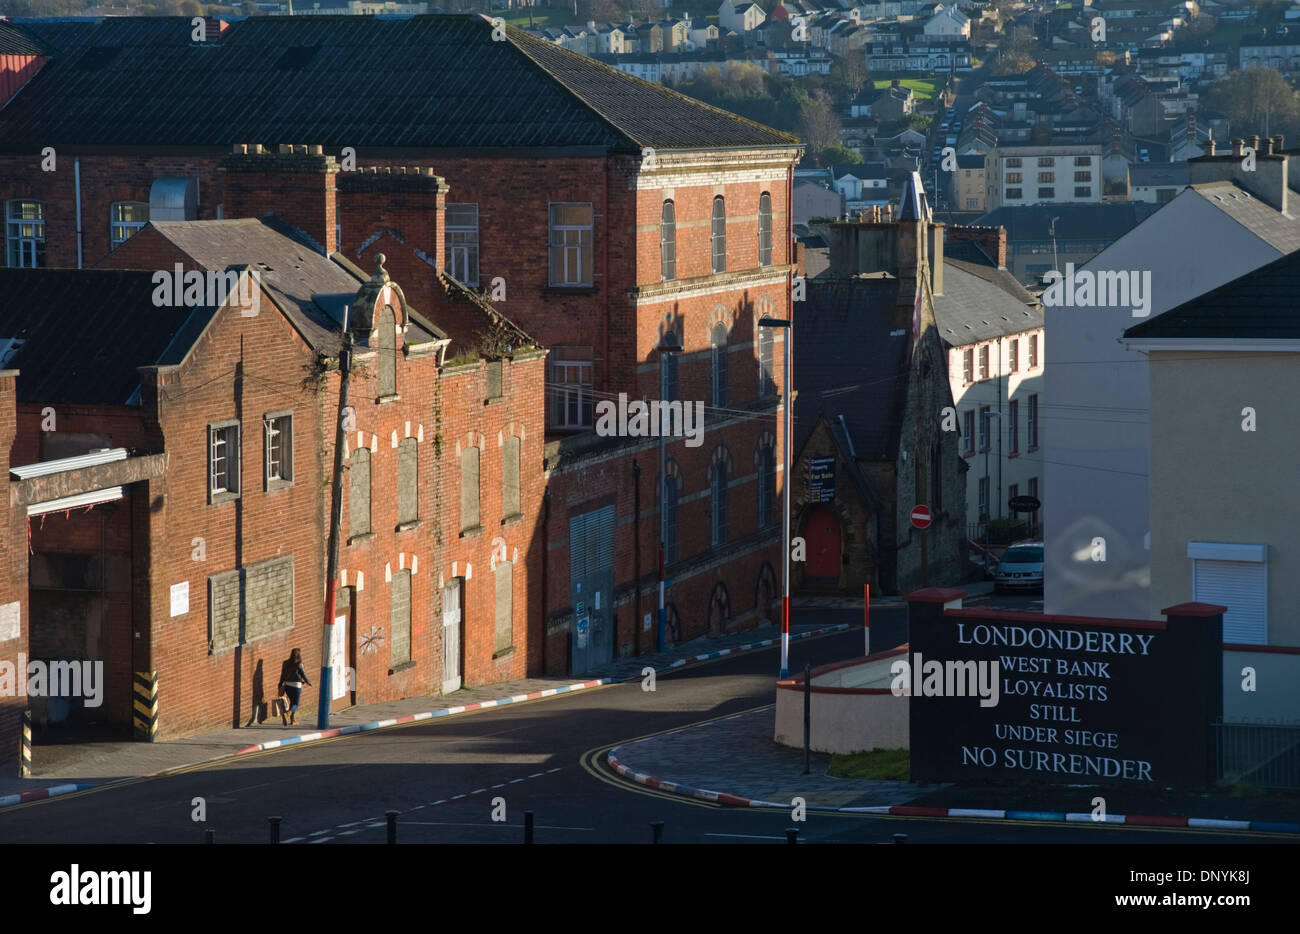 Protestant enclave on the West Bank of the Foyle, Derry/Londonderry, Northern Ireland. Stock Photo